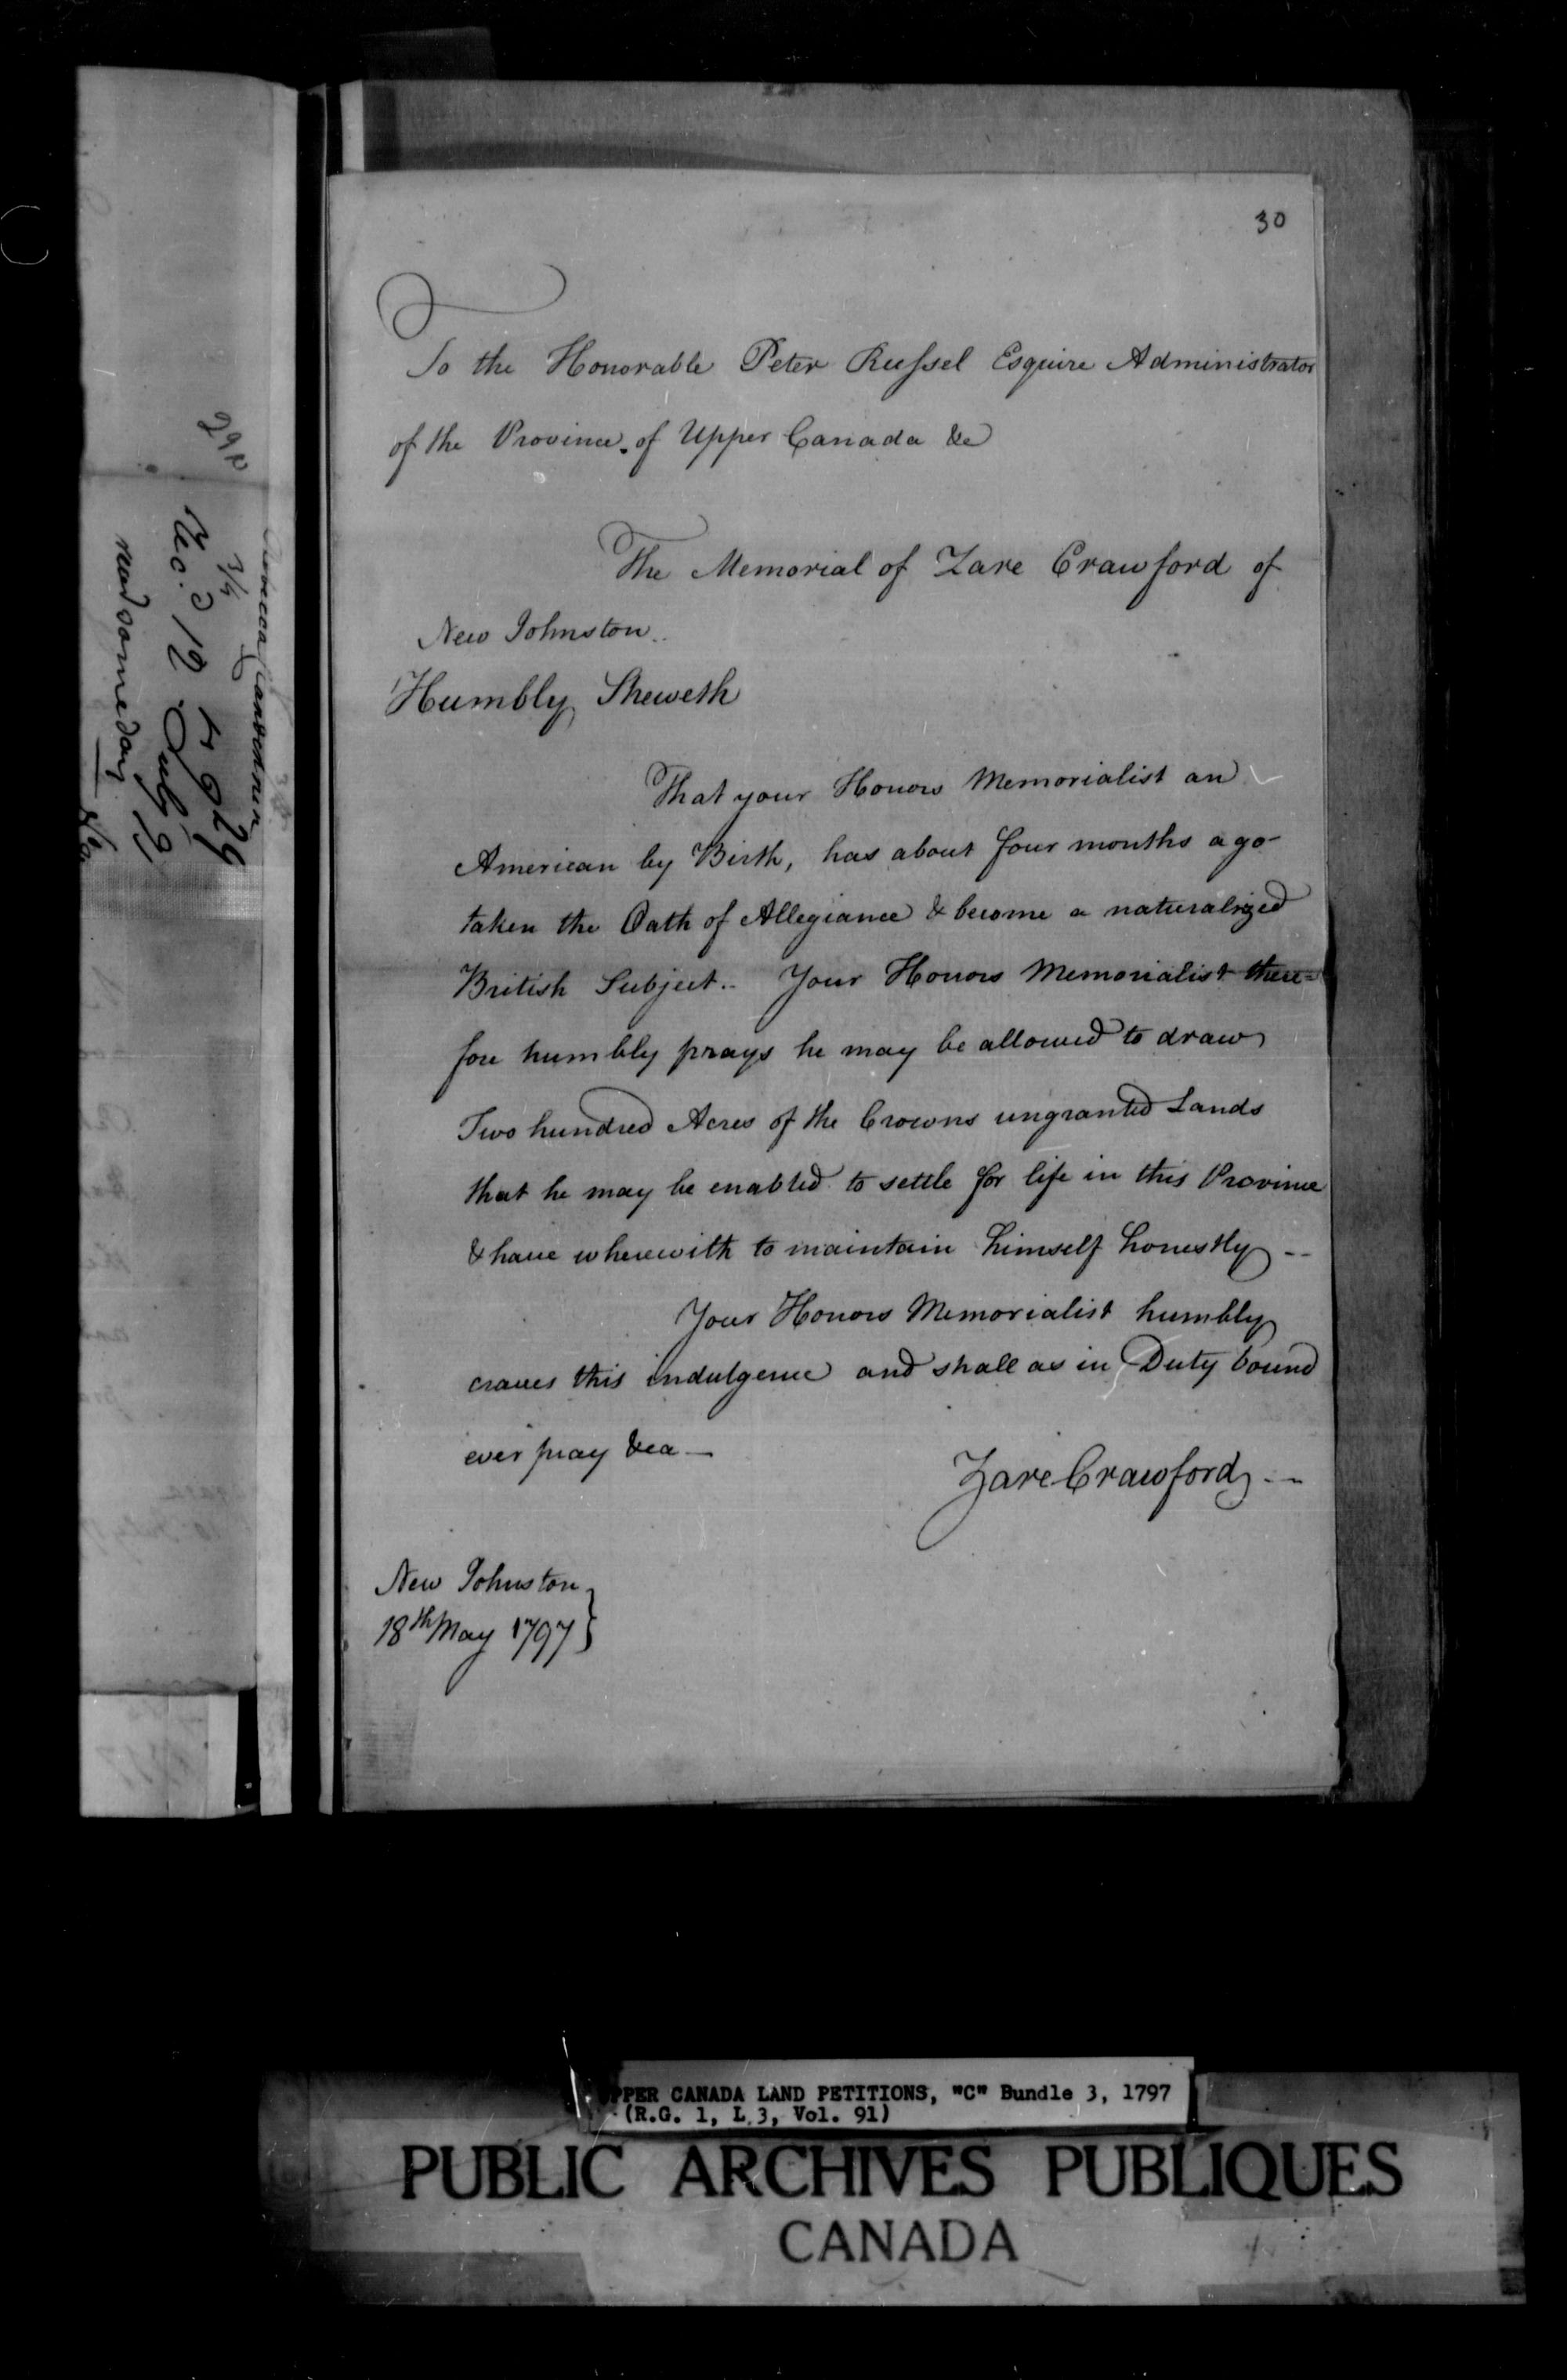 Title: Upper Canada Land Petitions (1763-1865) - Mikan Number: 205131 - Microform: c-1648